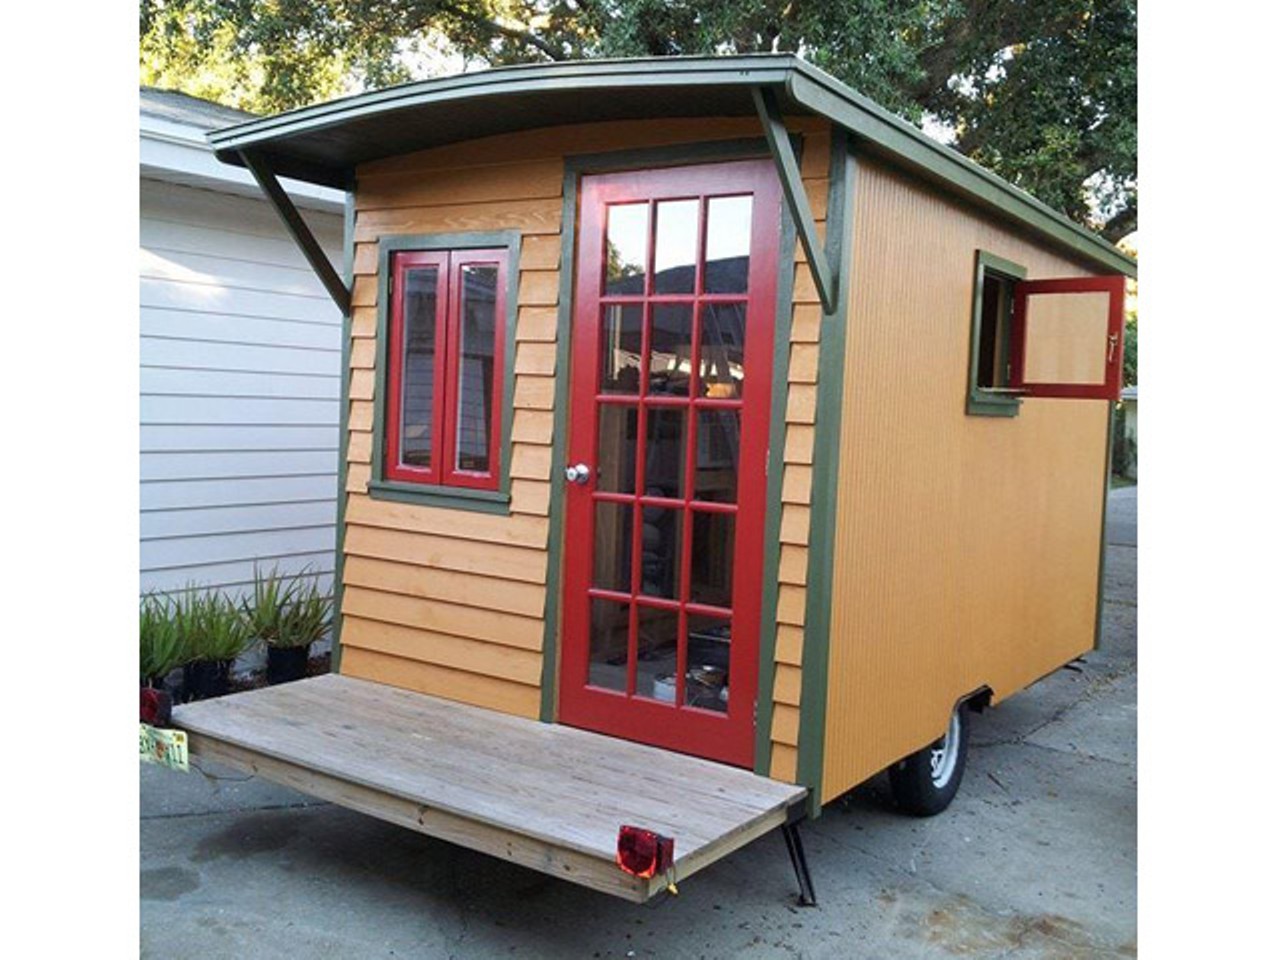 Go mini: 10 charming tiny homes for sale in Florida right now